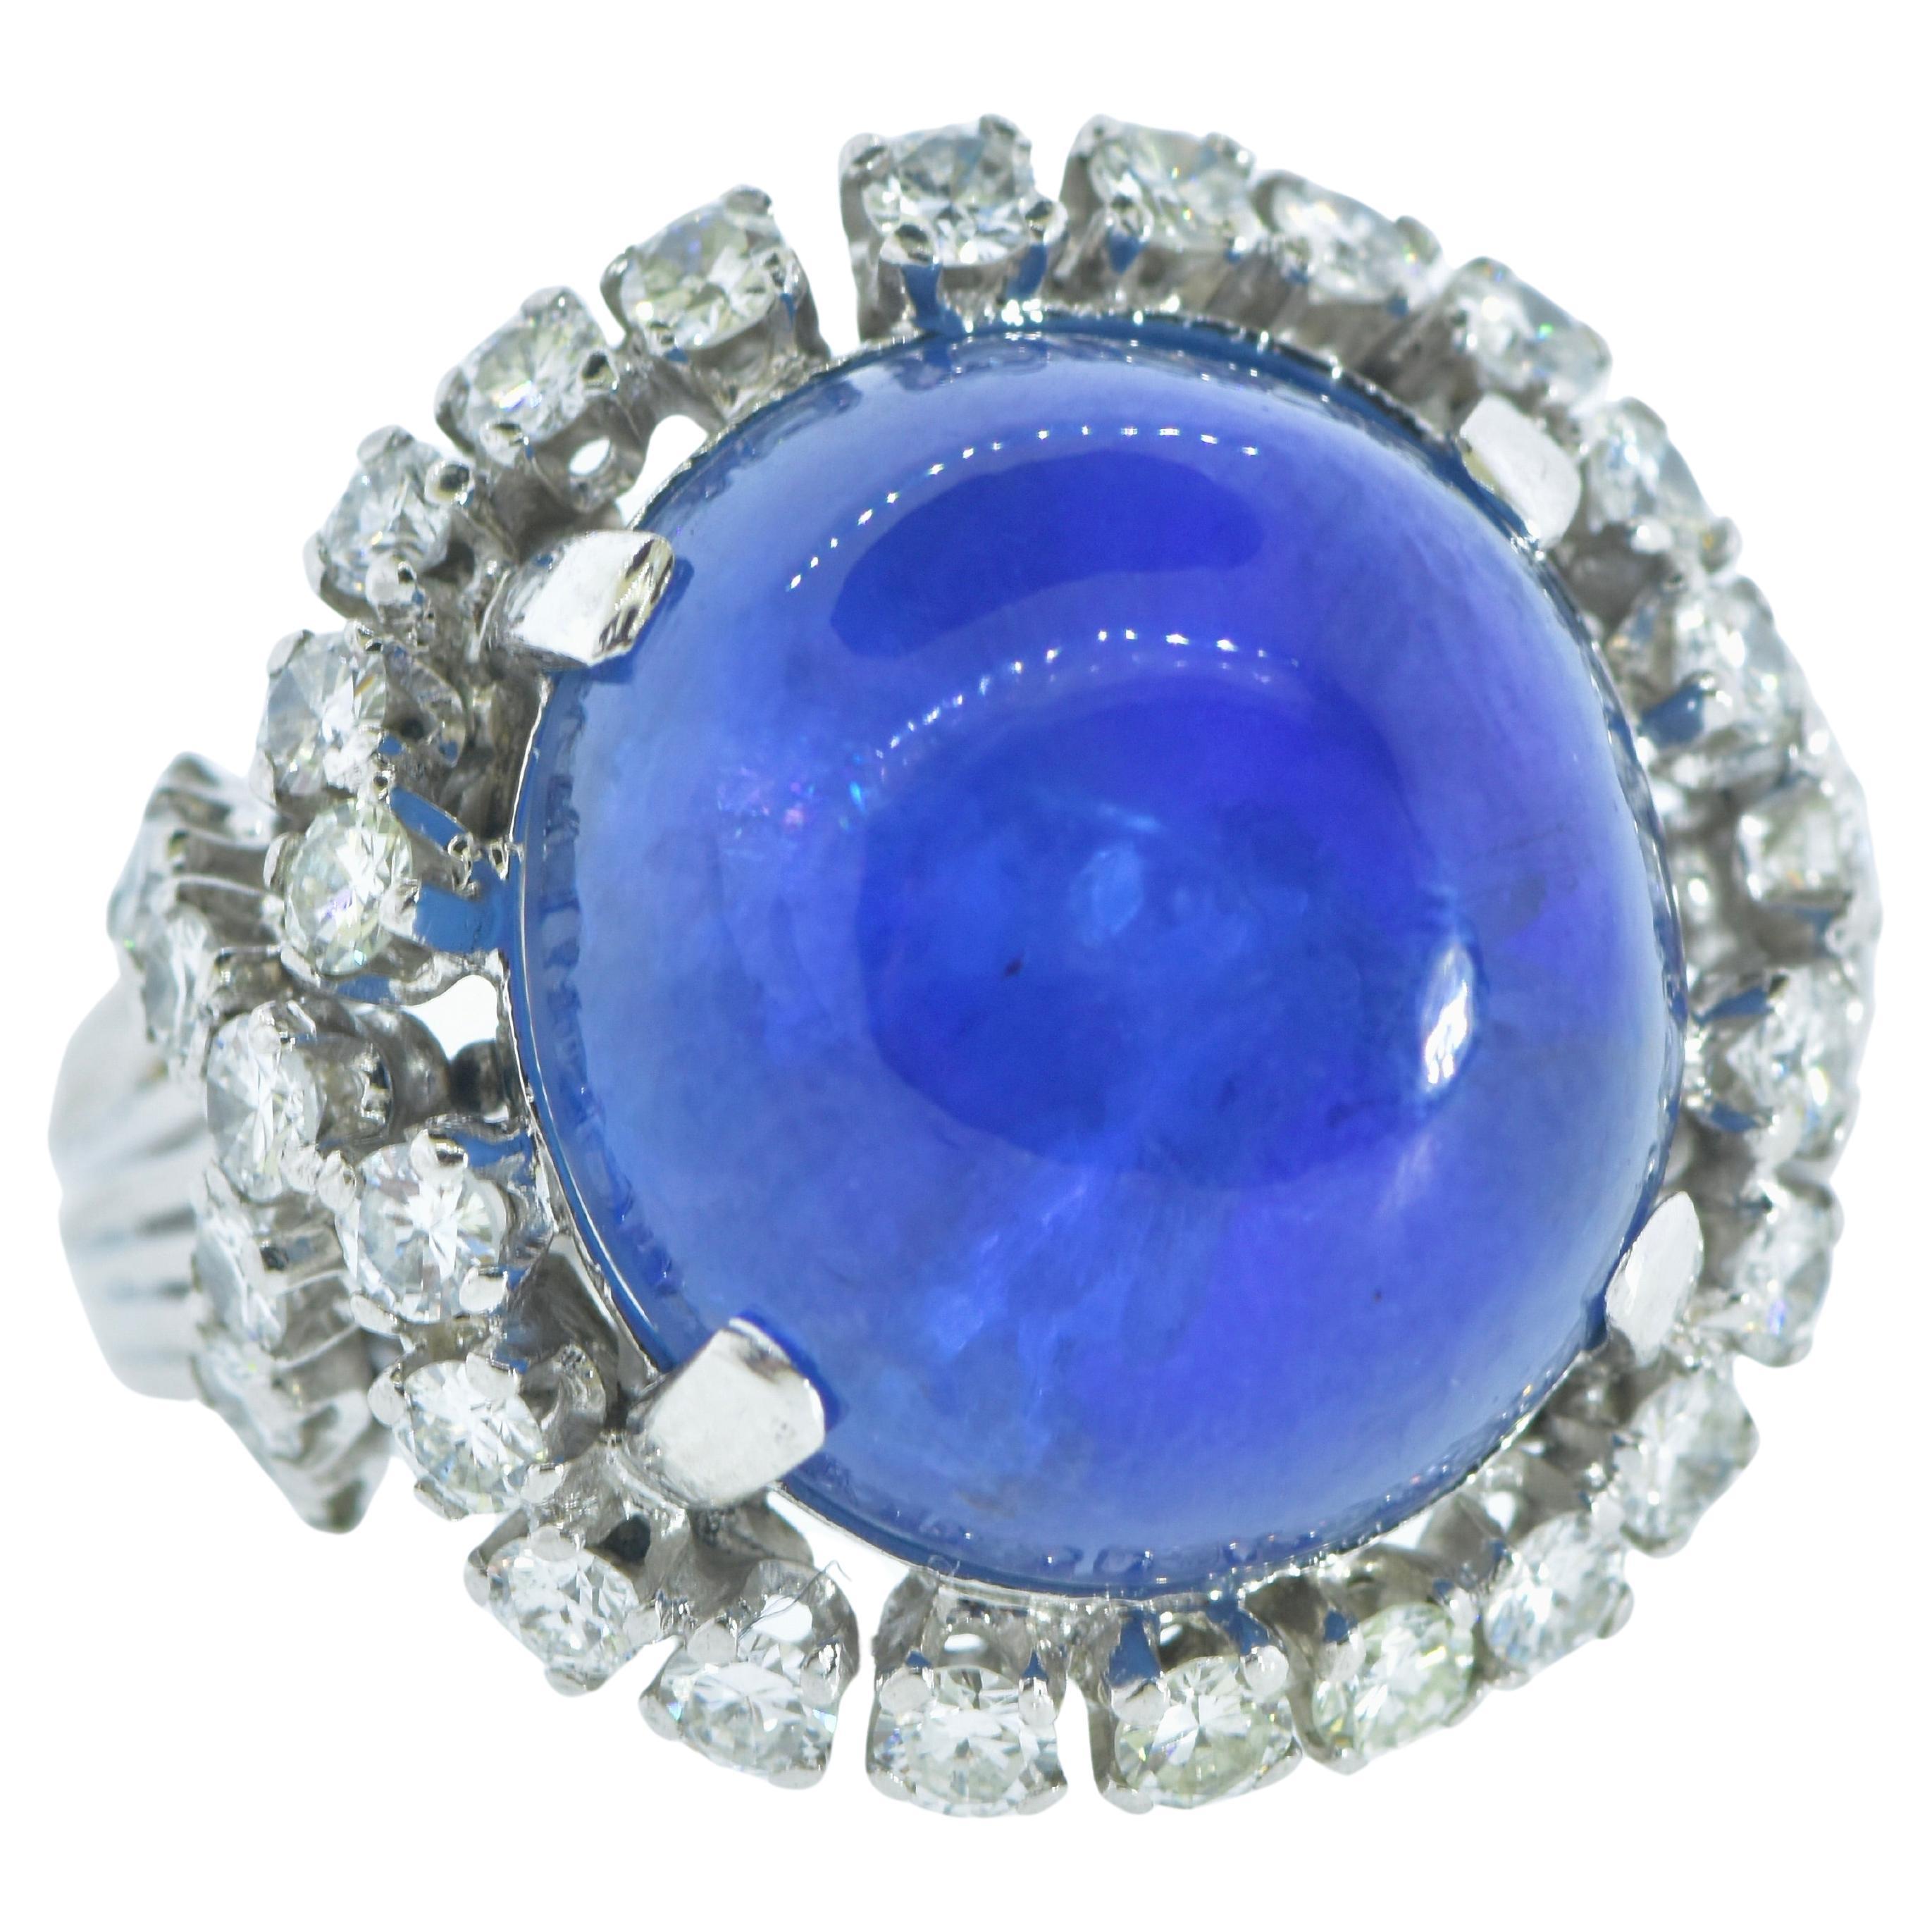 Star sapphire, unheated,  weighing an estimated 15 cts by our internal gemologist, this stone is large and impressive displaying a medium blue/violet color.   Accenting this center stone are 36 white brilliant cut diamonds, well matched in their